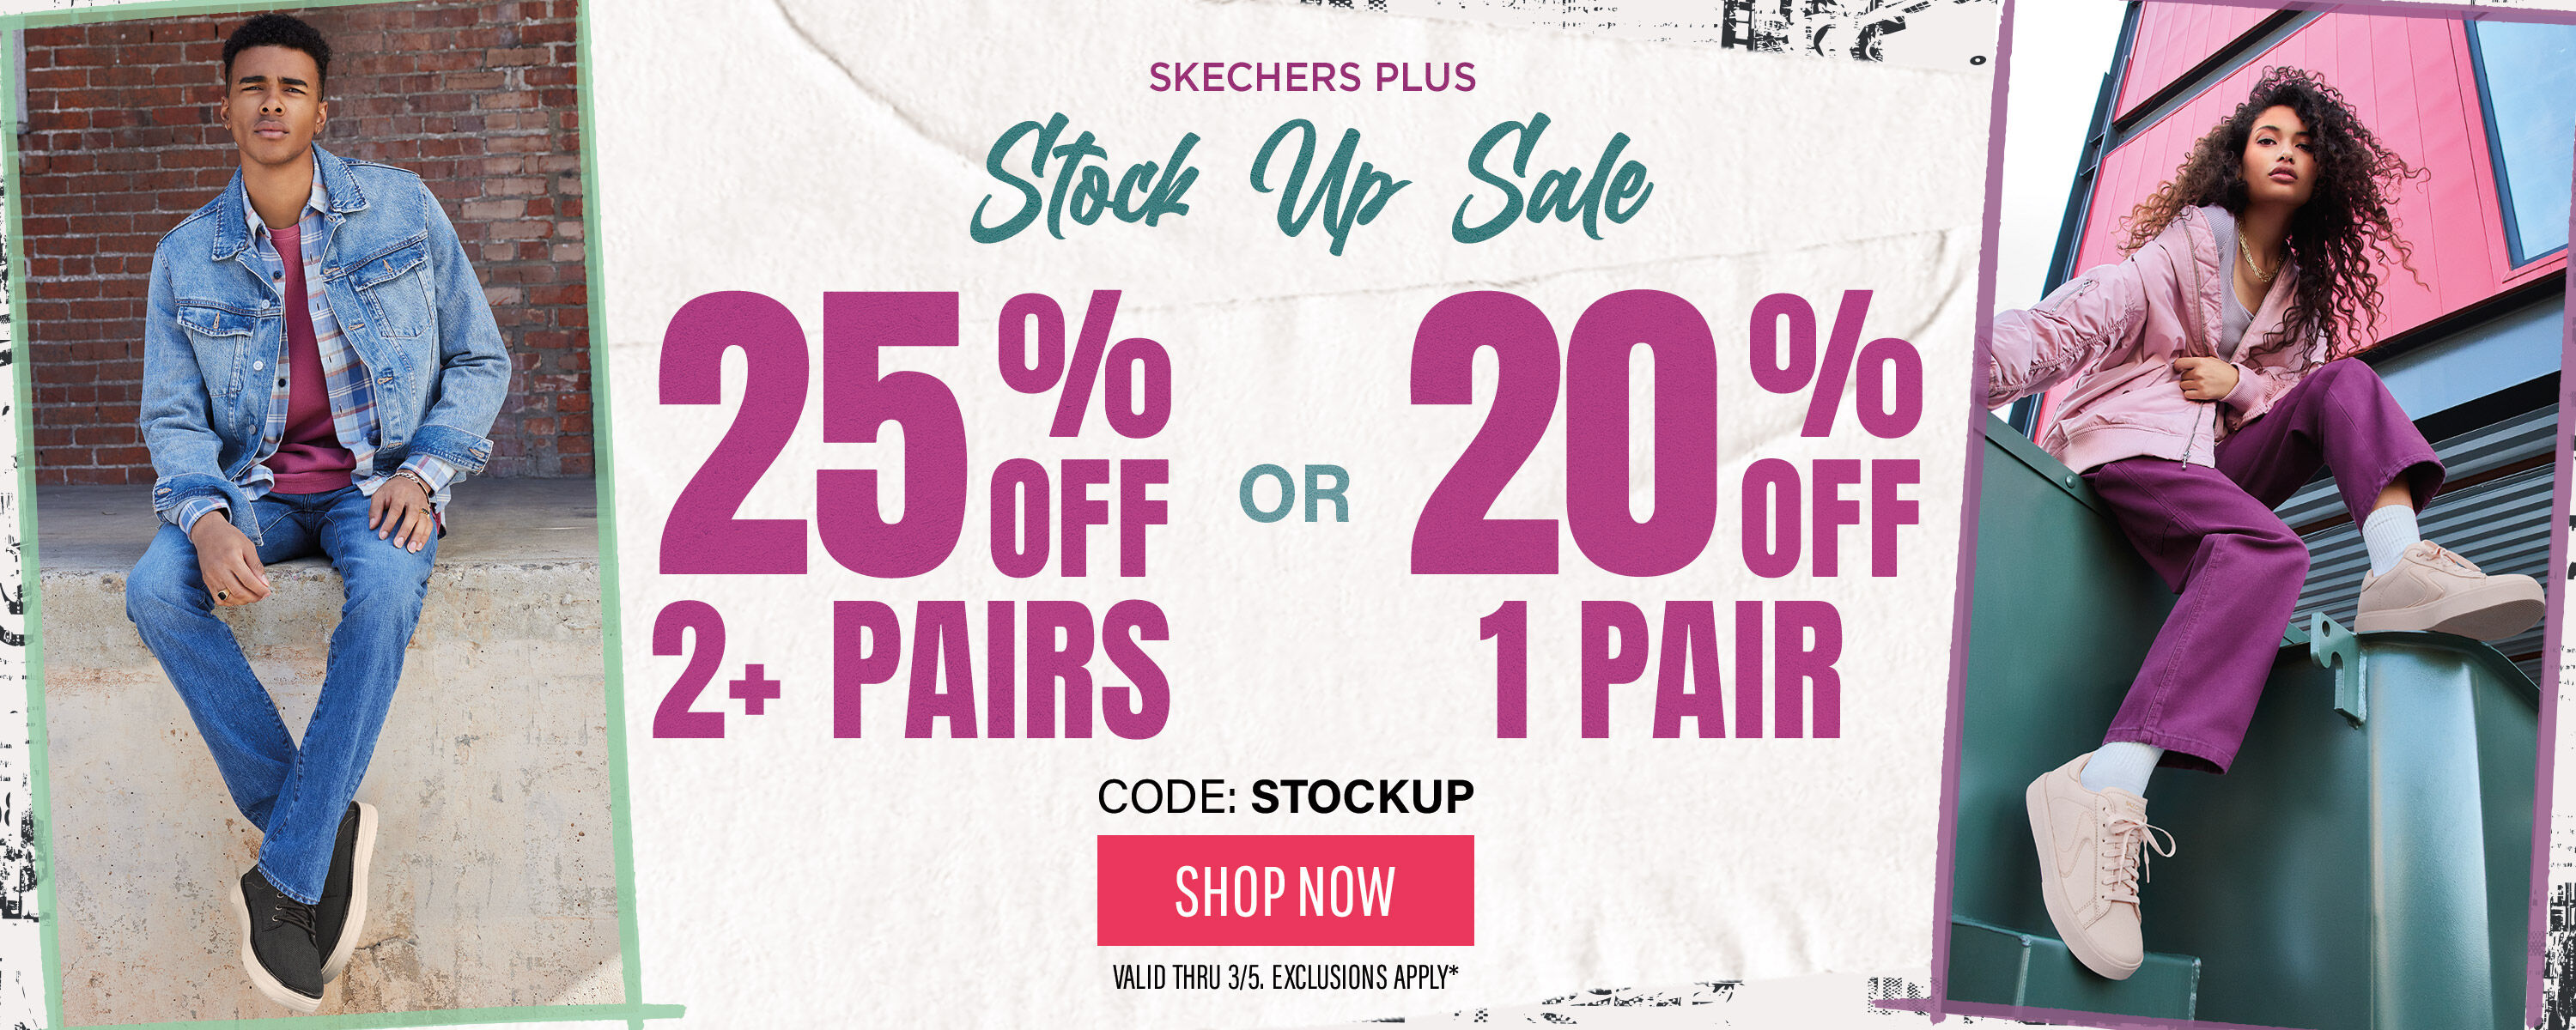 Stock Up Sale! 20% off 1 Pair & 25% off 2 Pairs ~ Code: STOCKUP - SHOP NOW